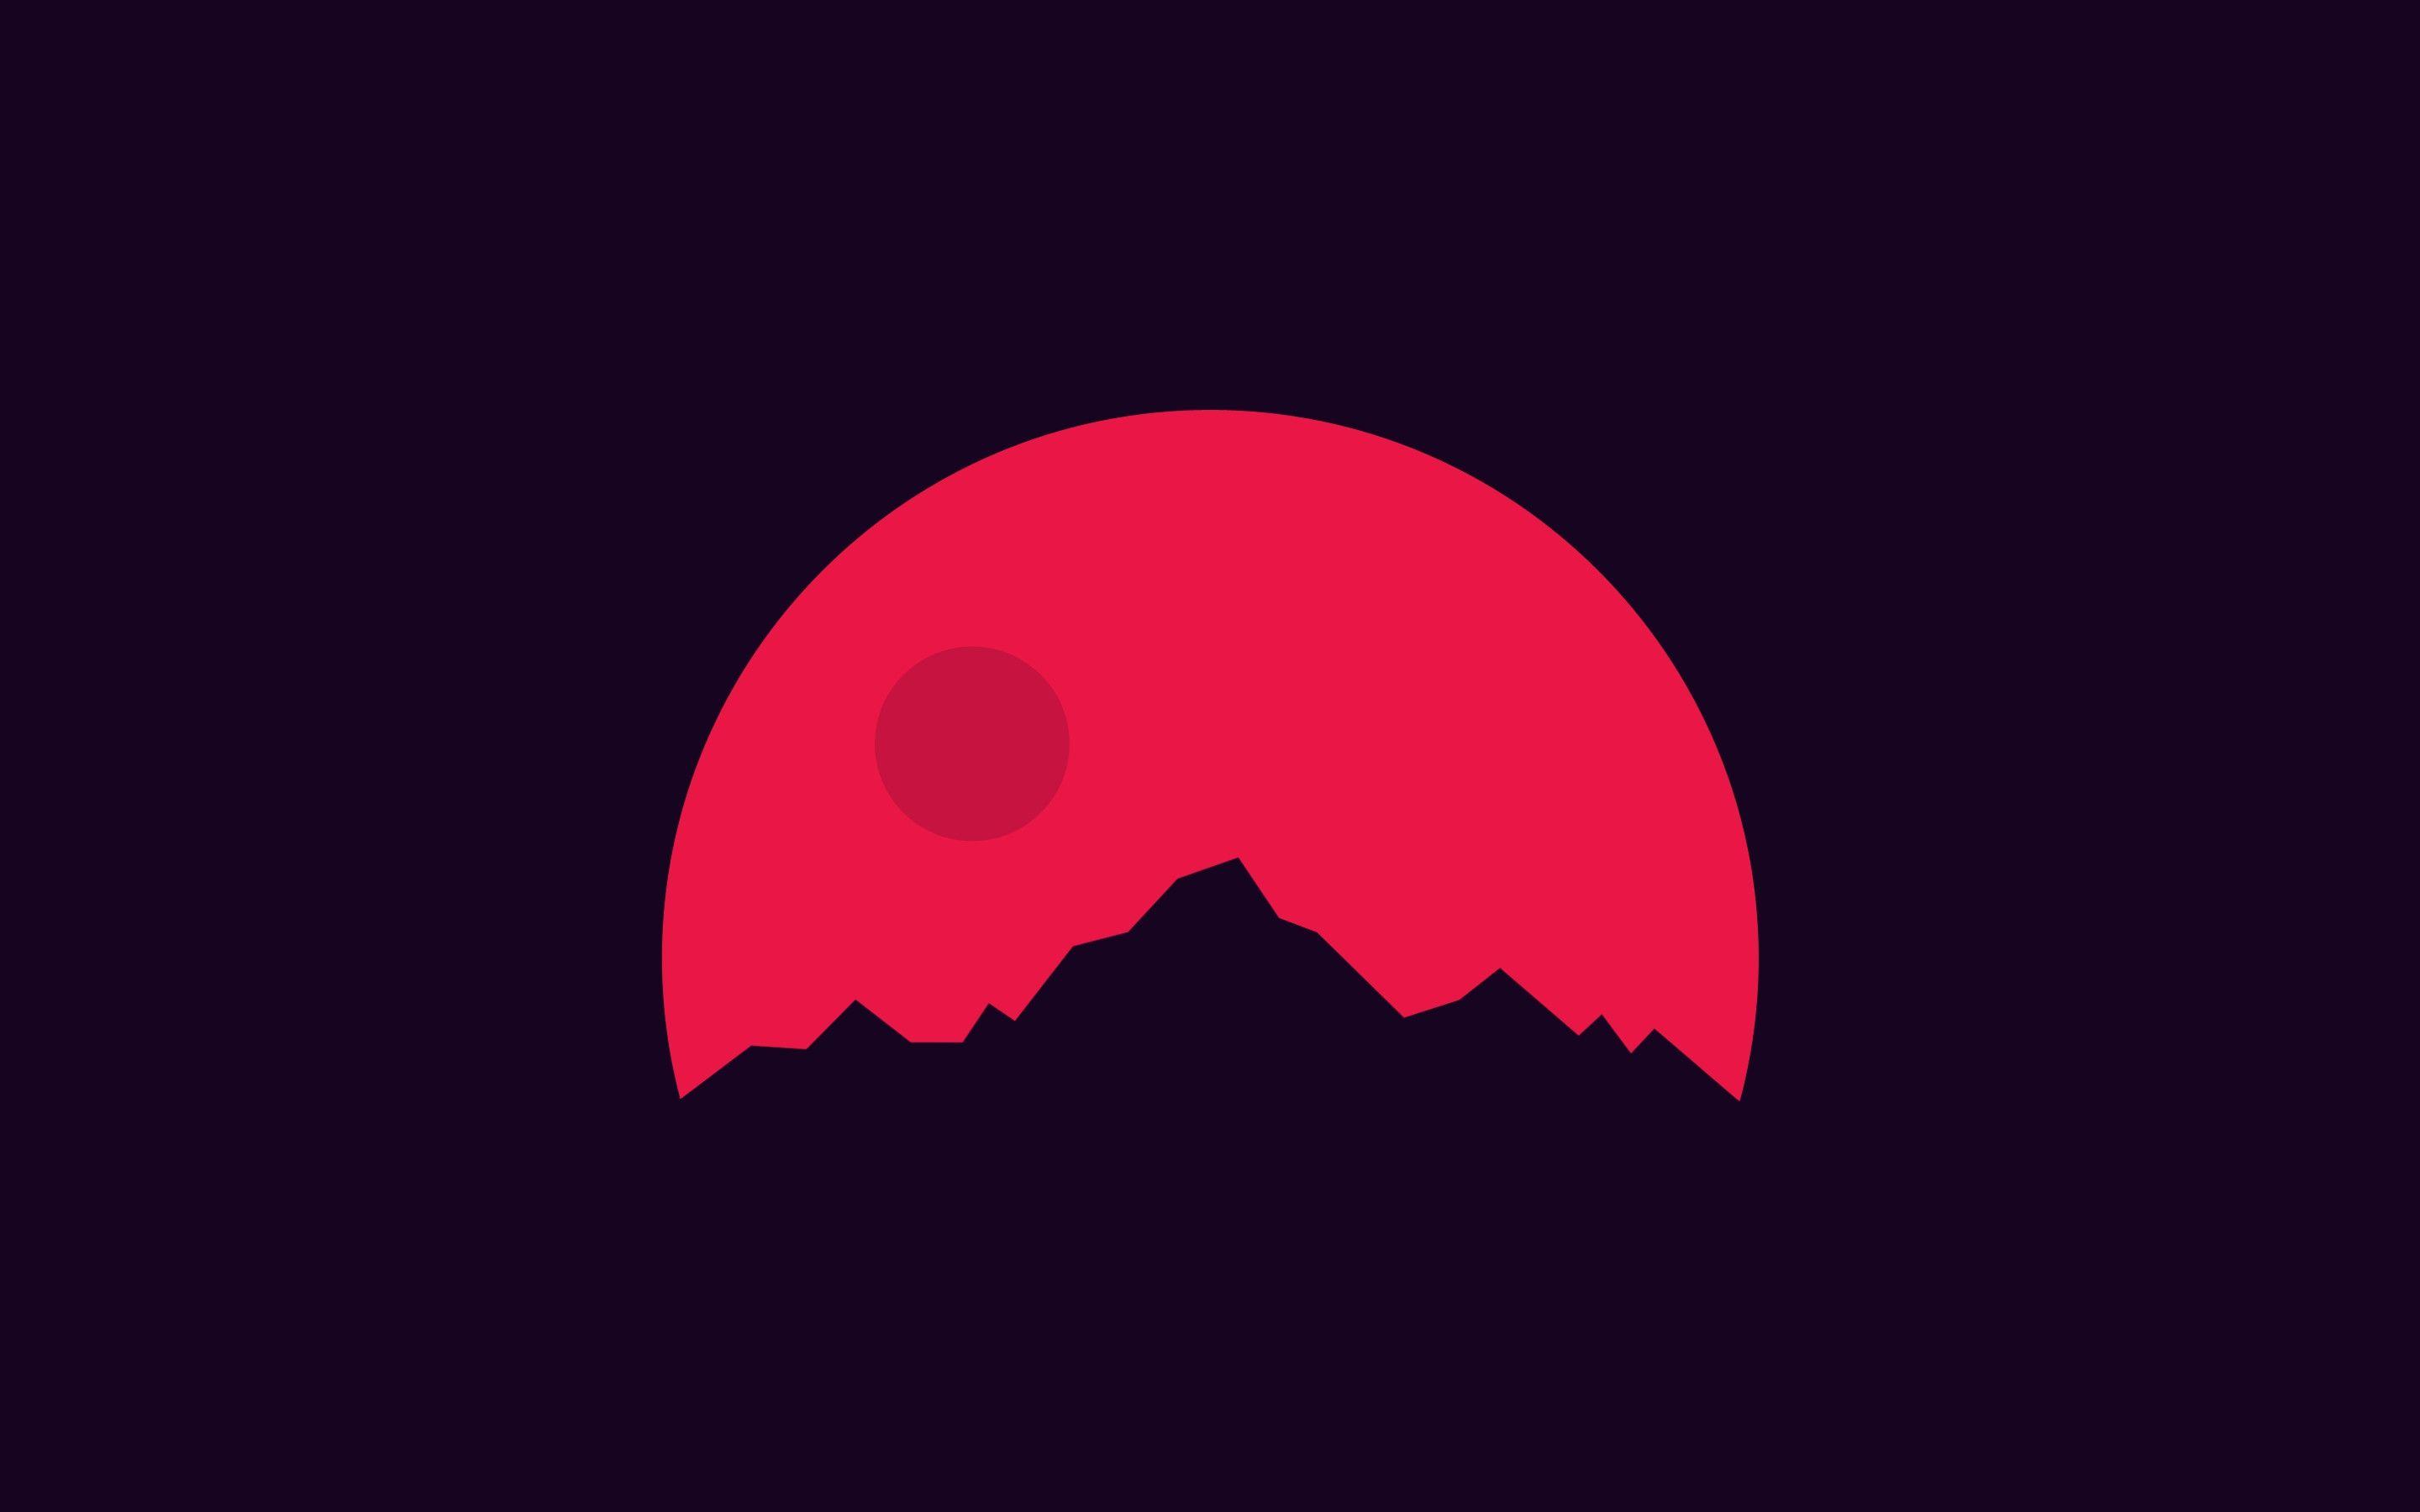 Moon Mountain Logo - Download 2880x1800 Red Moon, Mountain, Minimal, Flat Wallpapers for ...